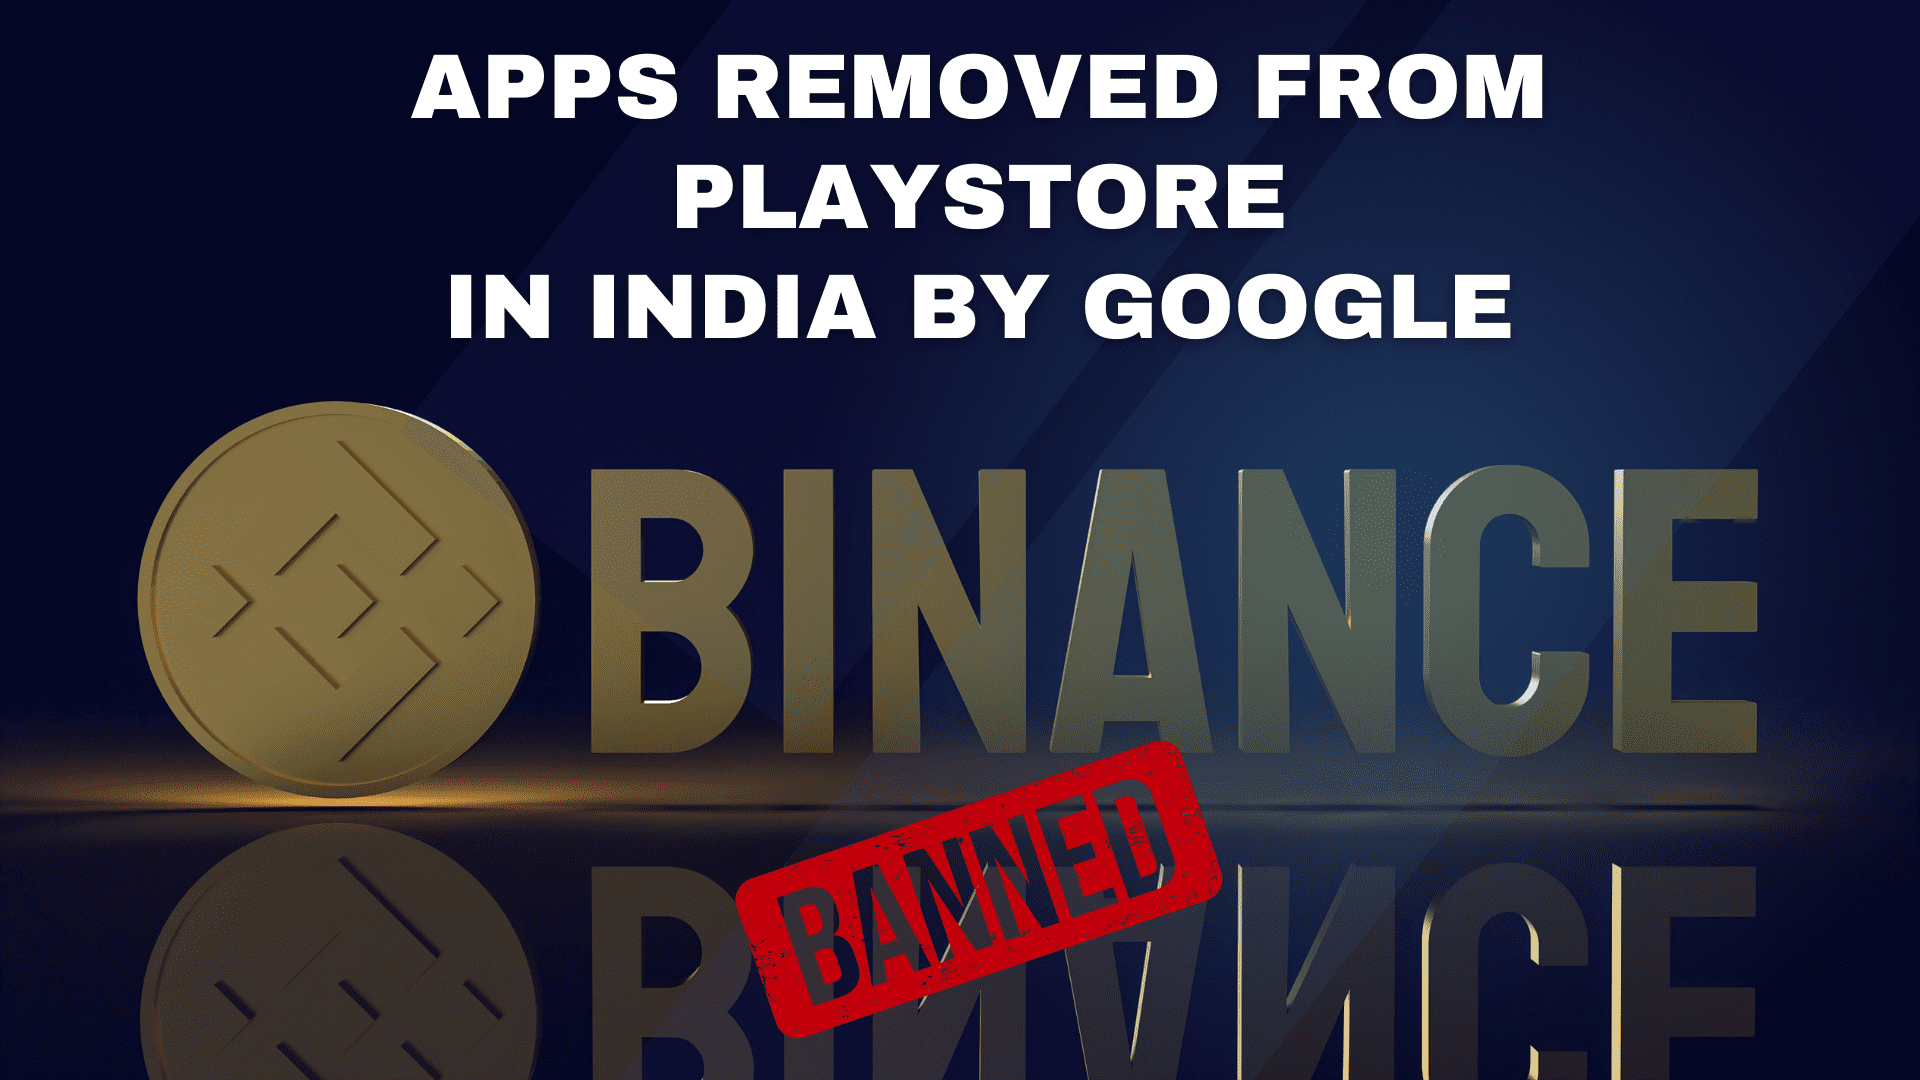 Google Has Withdrawn Several International Cryptocurrency Applications, Including Binance And Kraken, From Its Play Store In India